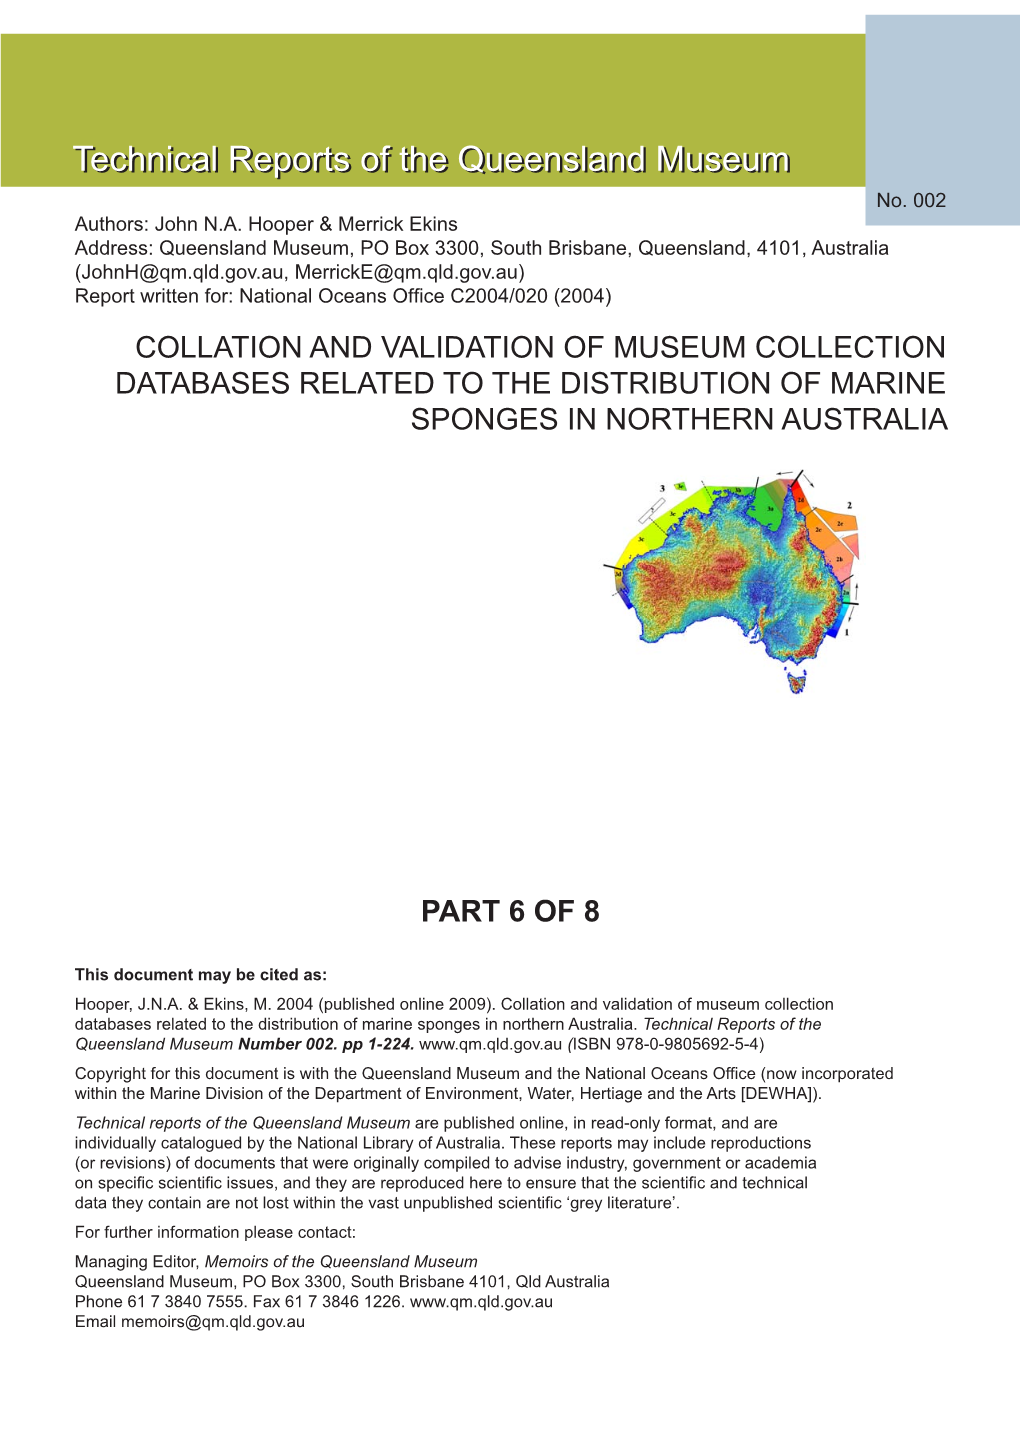 Collation and Validation of Museum Collection Databases Related to the Distribution of Marine Sponges in Northern Australia